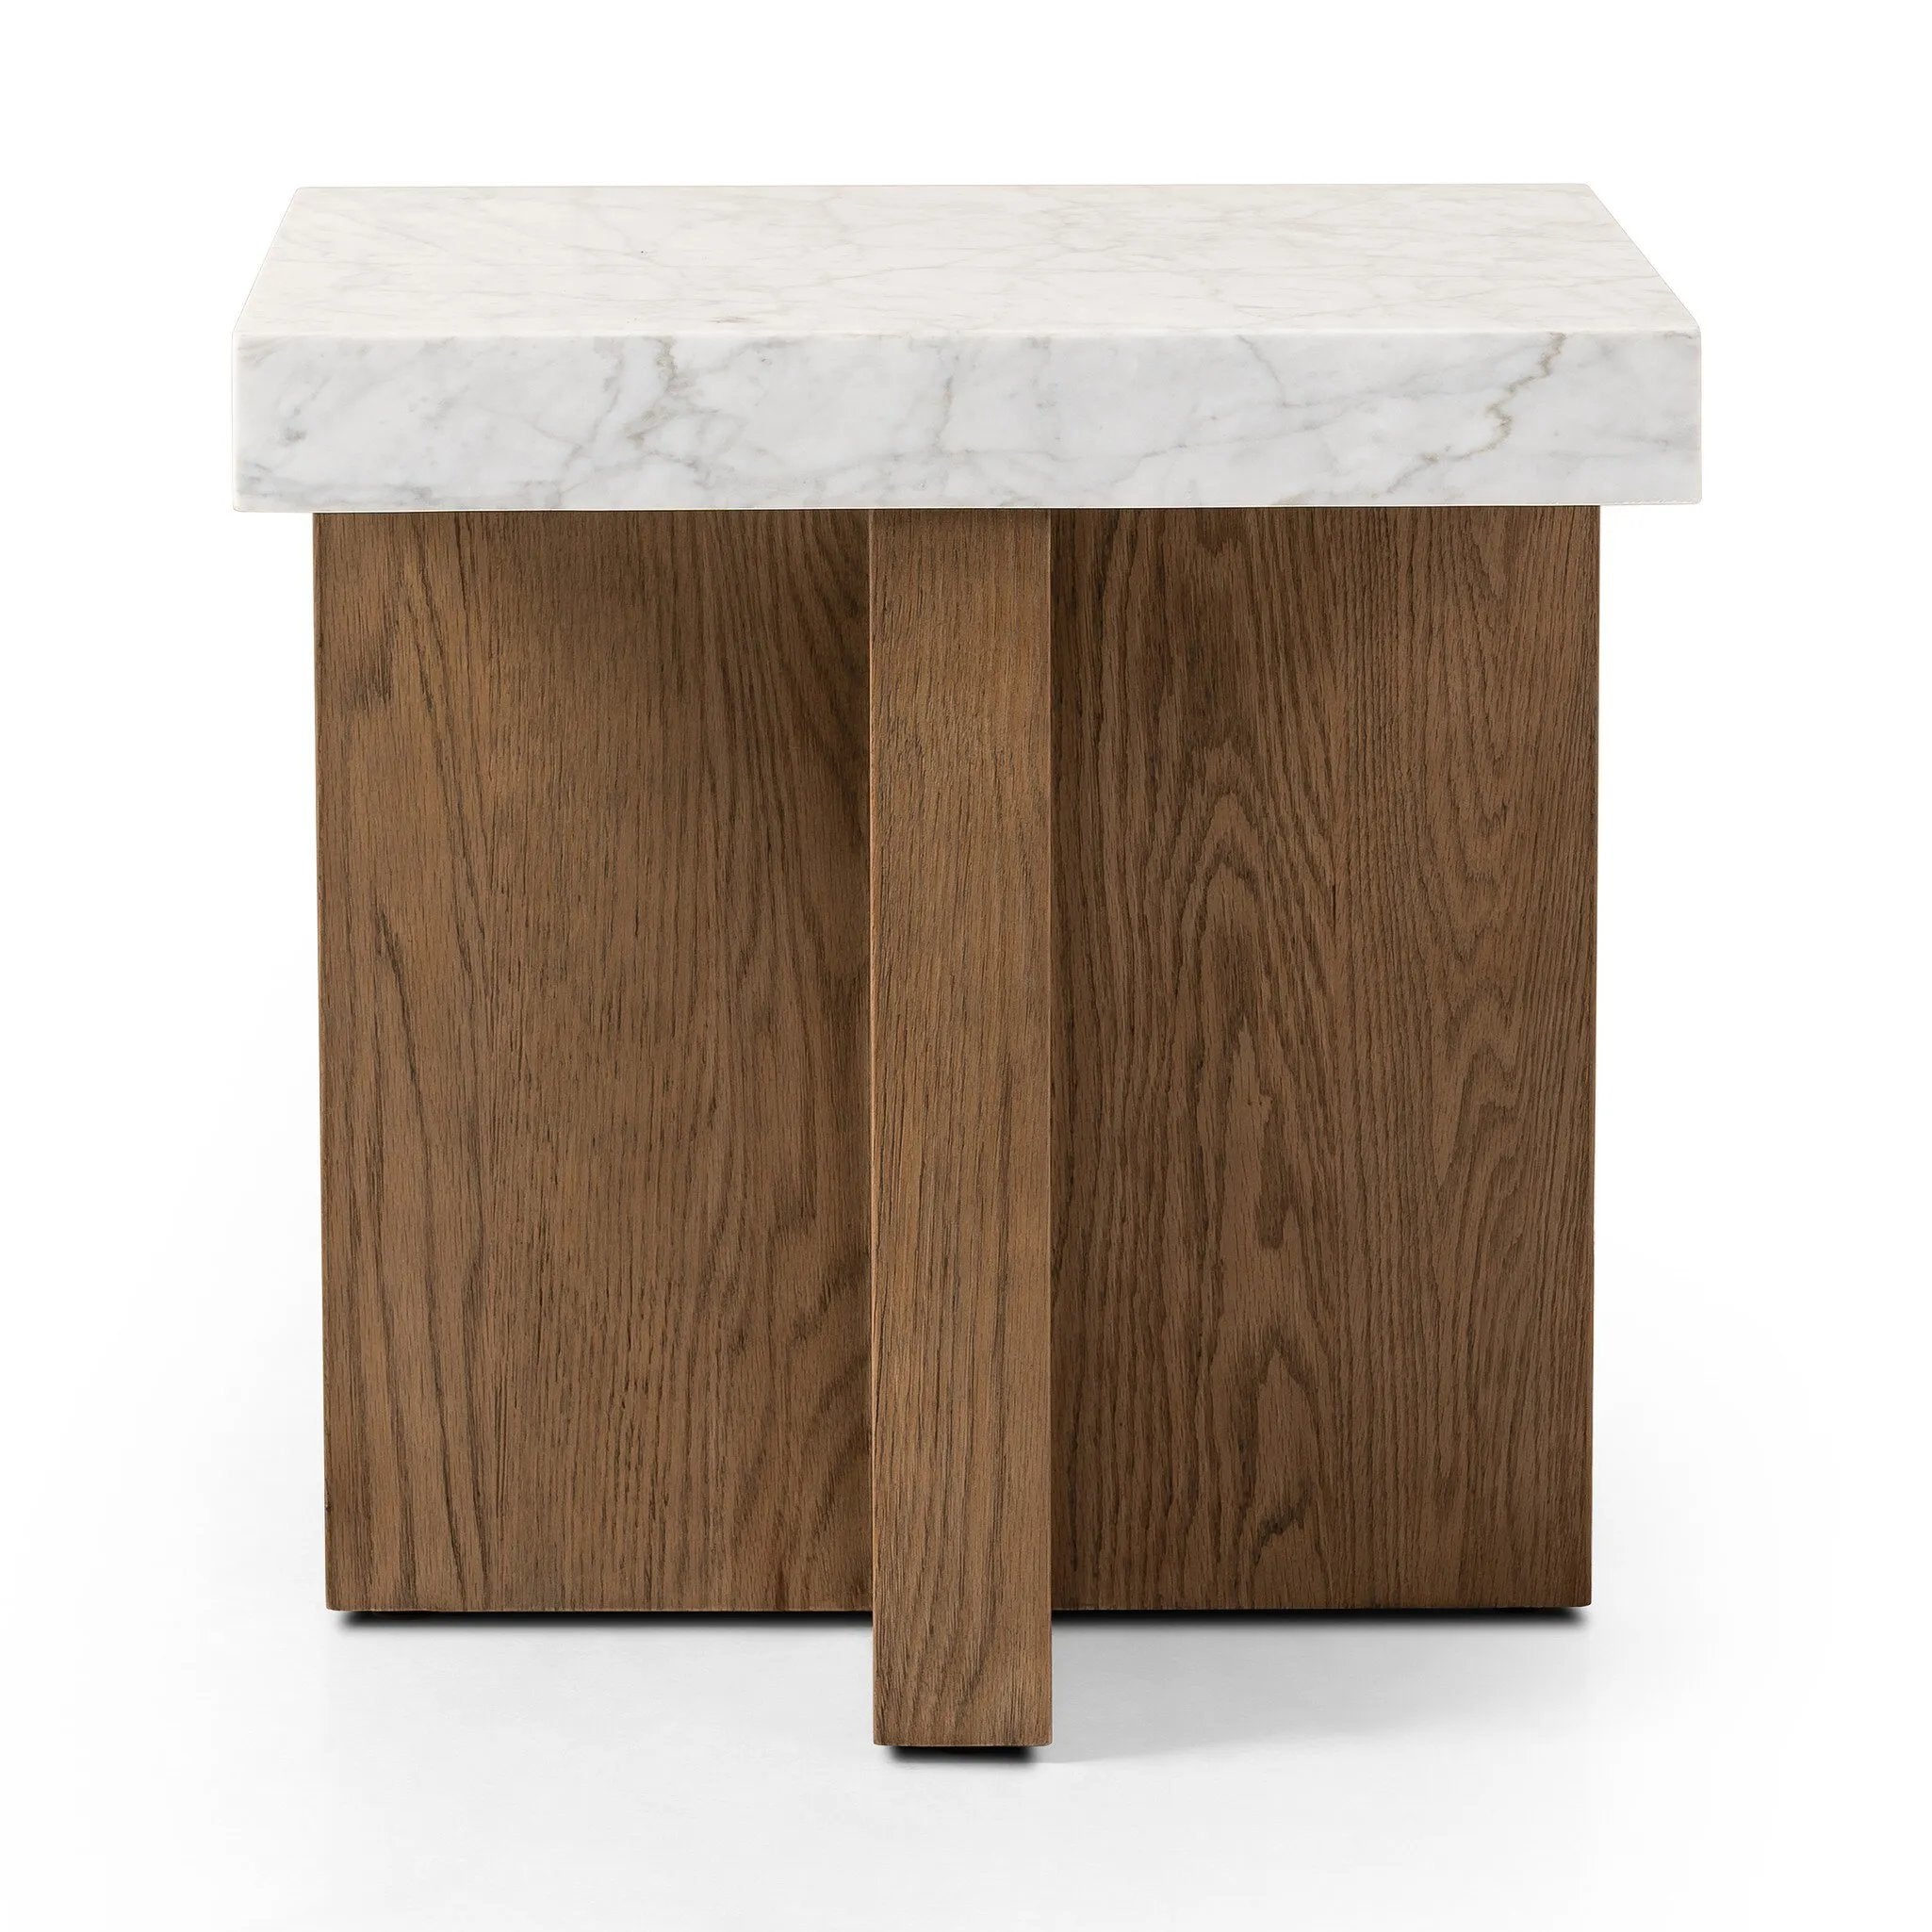 Structured lines and chunky proportions fuse for a mixed material end table of smoked oak and polished marble.Collection: Hughe Amethyst Home provides interior design, new home construction design consulting, vintage area rugs, and lighting in the Omaha metro area.